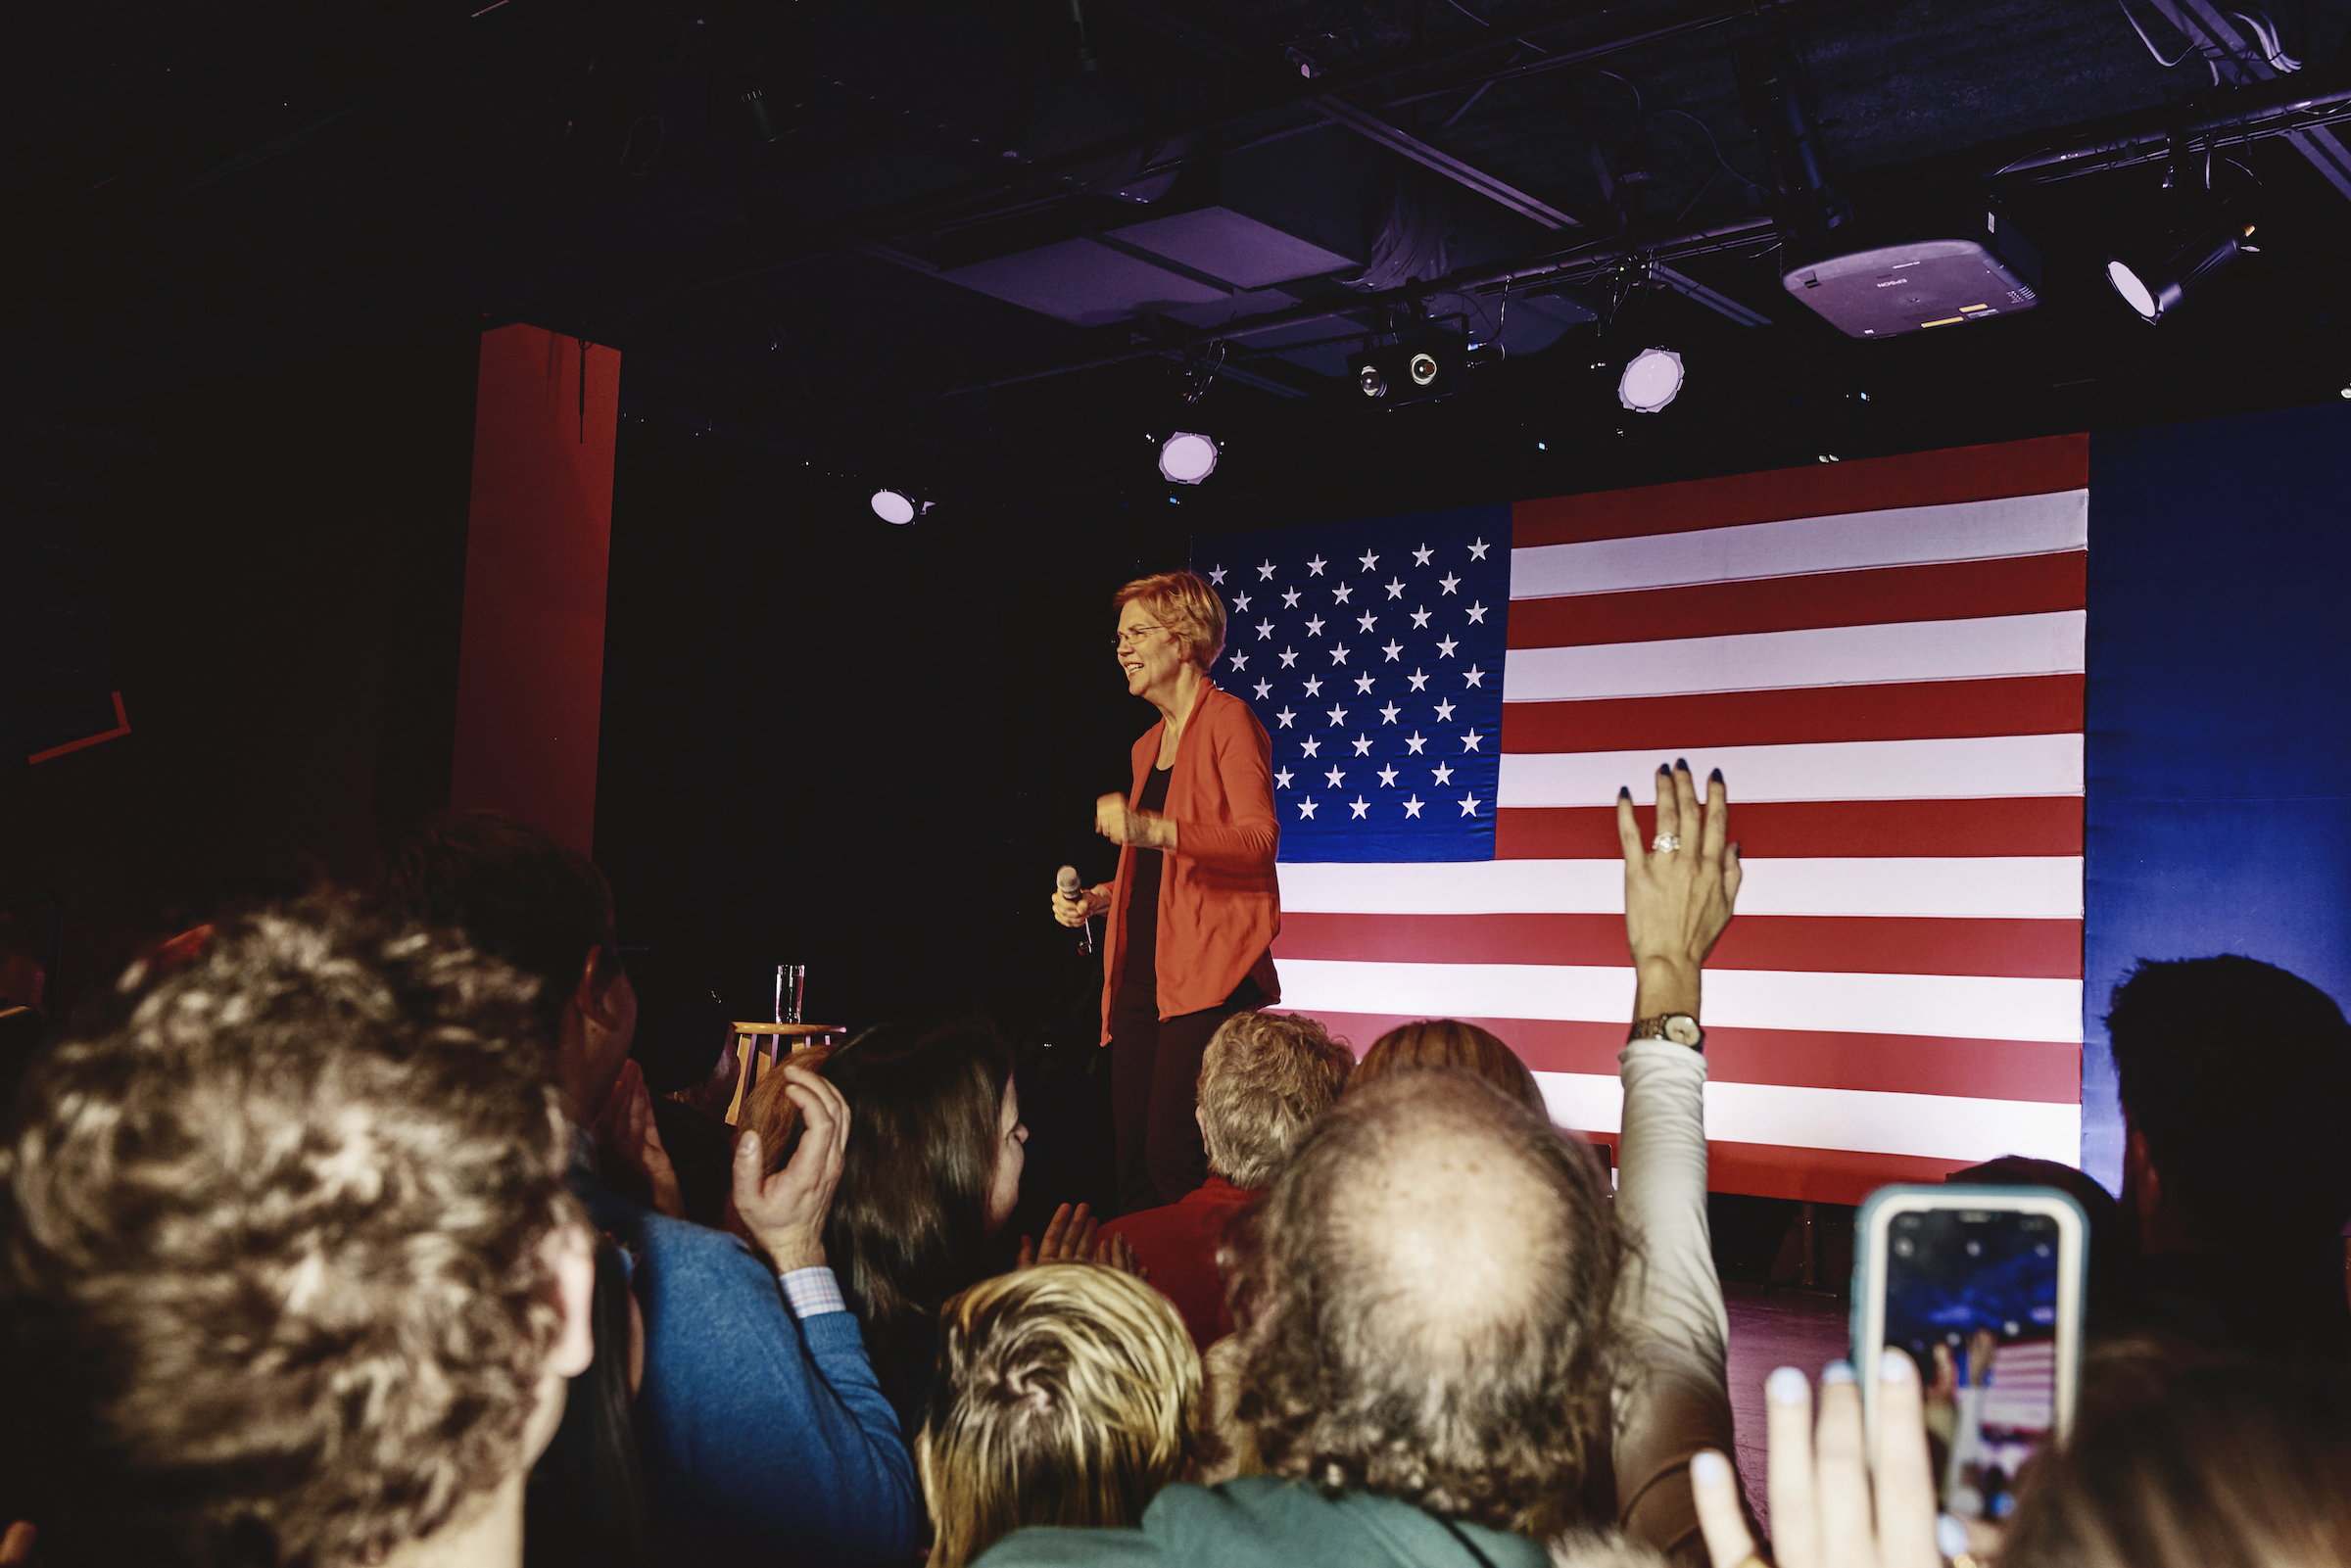 Derry, New Hampshire - February 6, 2020: Elizabeth Warren speaking at her Derry GOTV Event at the Tupelo Music Hall in Derry, New Hampshire. Credit: Tony Luong for Time